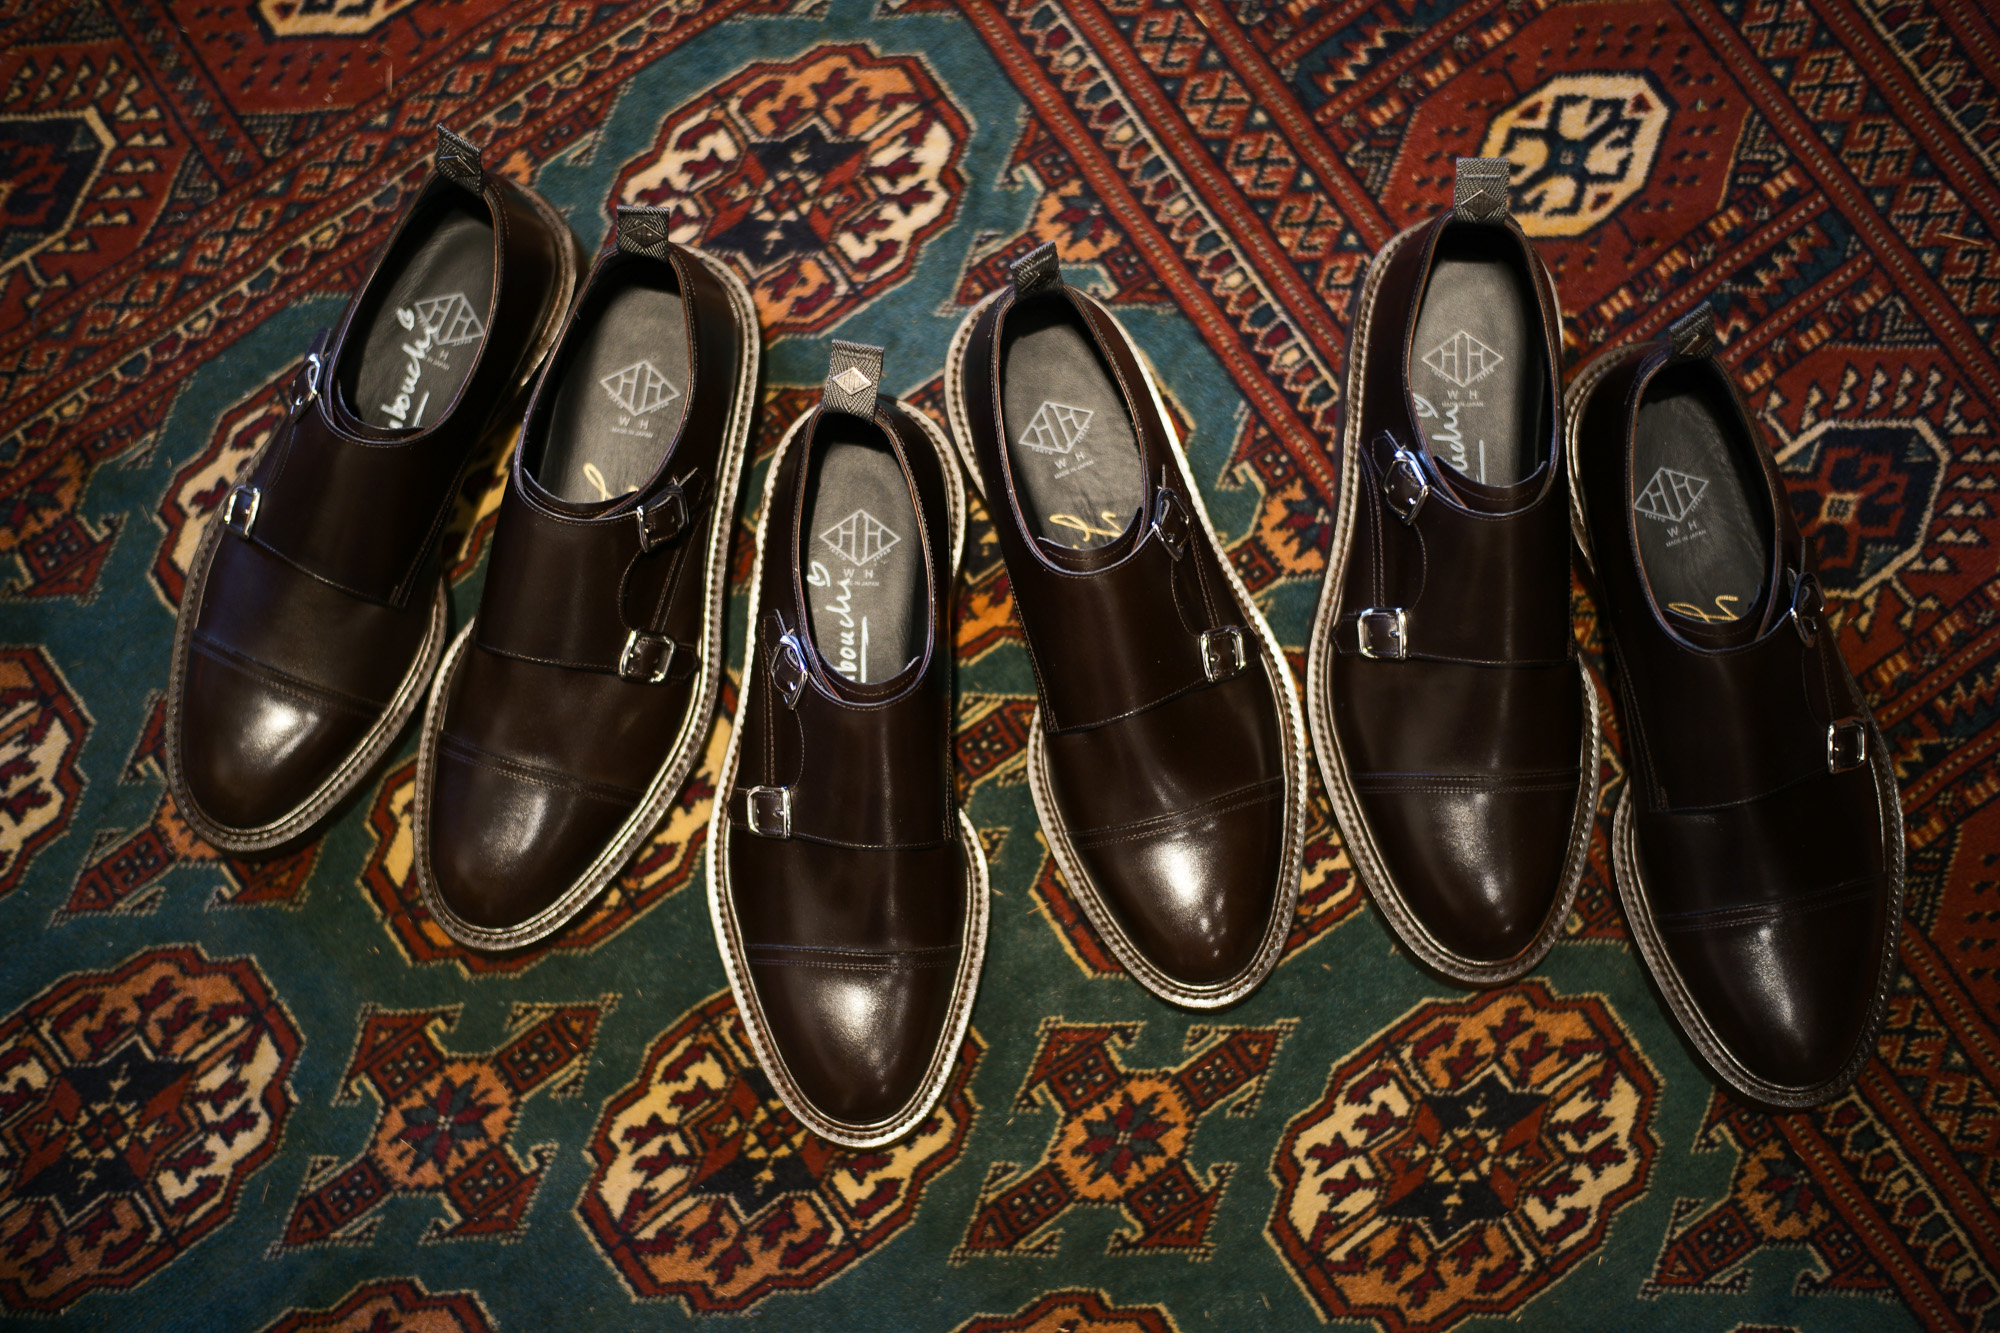 WH (ダブルエイチ) 【WH-0300(WHS-0300)】 Double Monk Strap Shoes